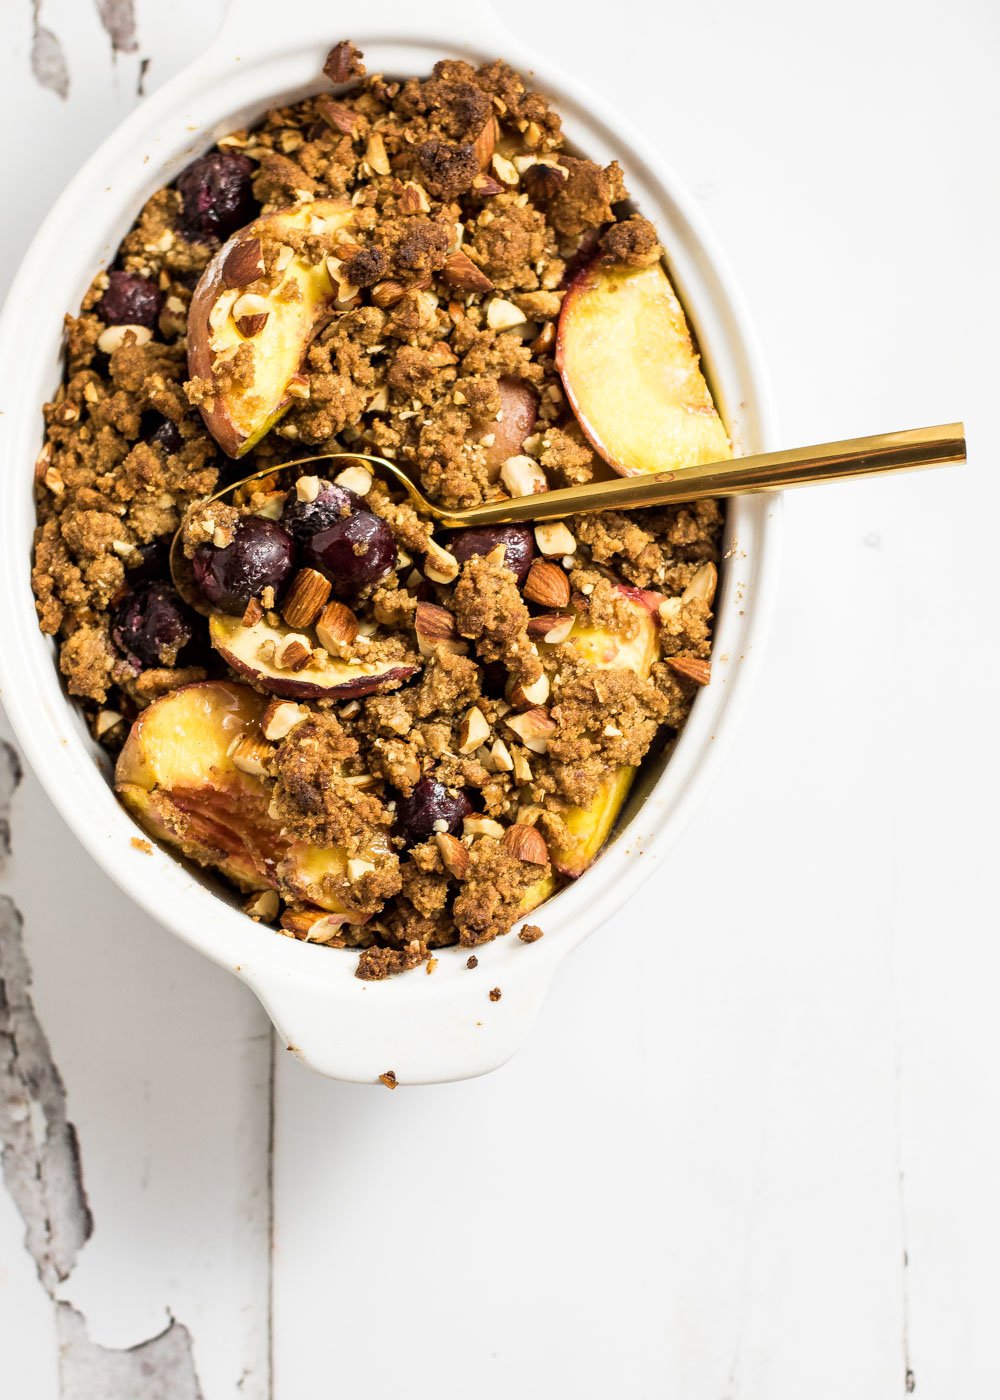 Roasted peaches and sweet cherries with graham cracker crumble is the perfect bright summer dessert that highlight fresh summer fruit!